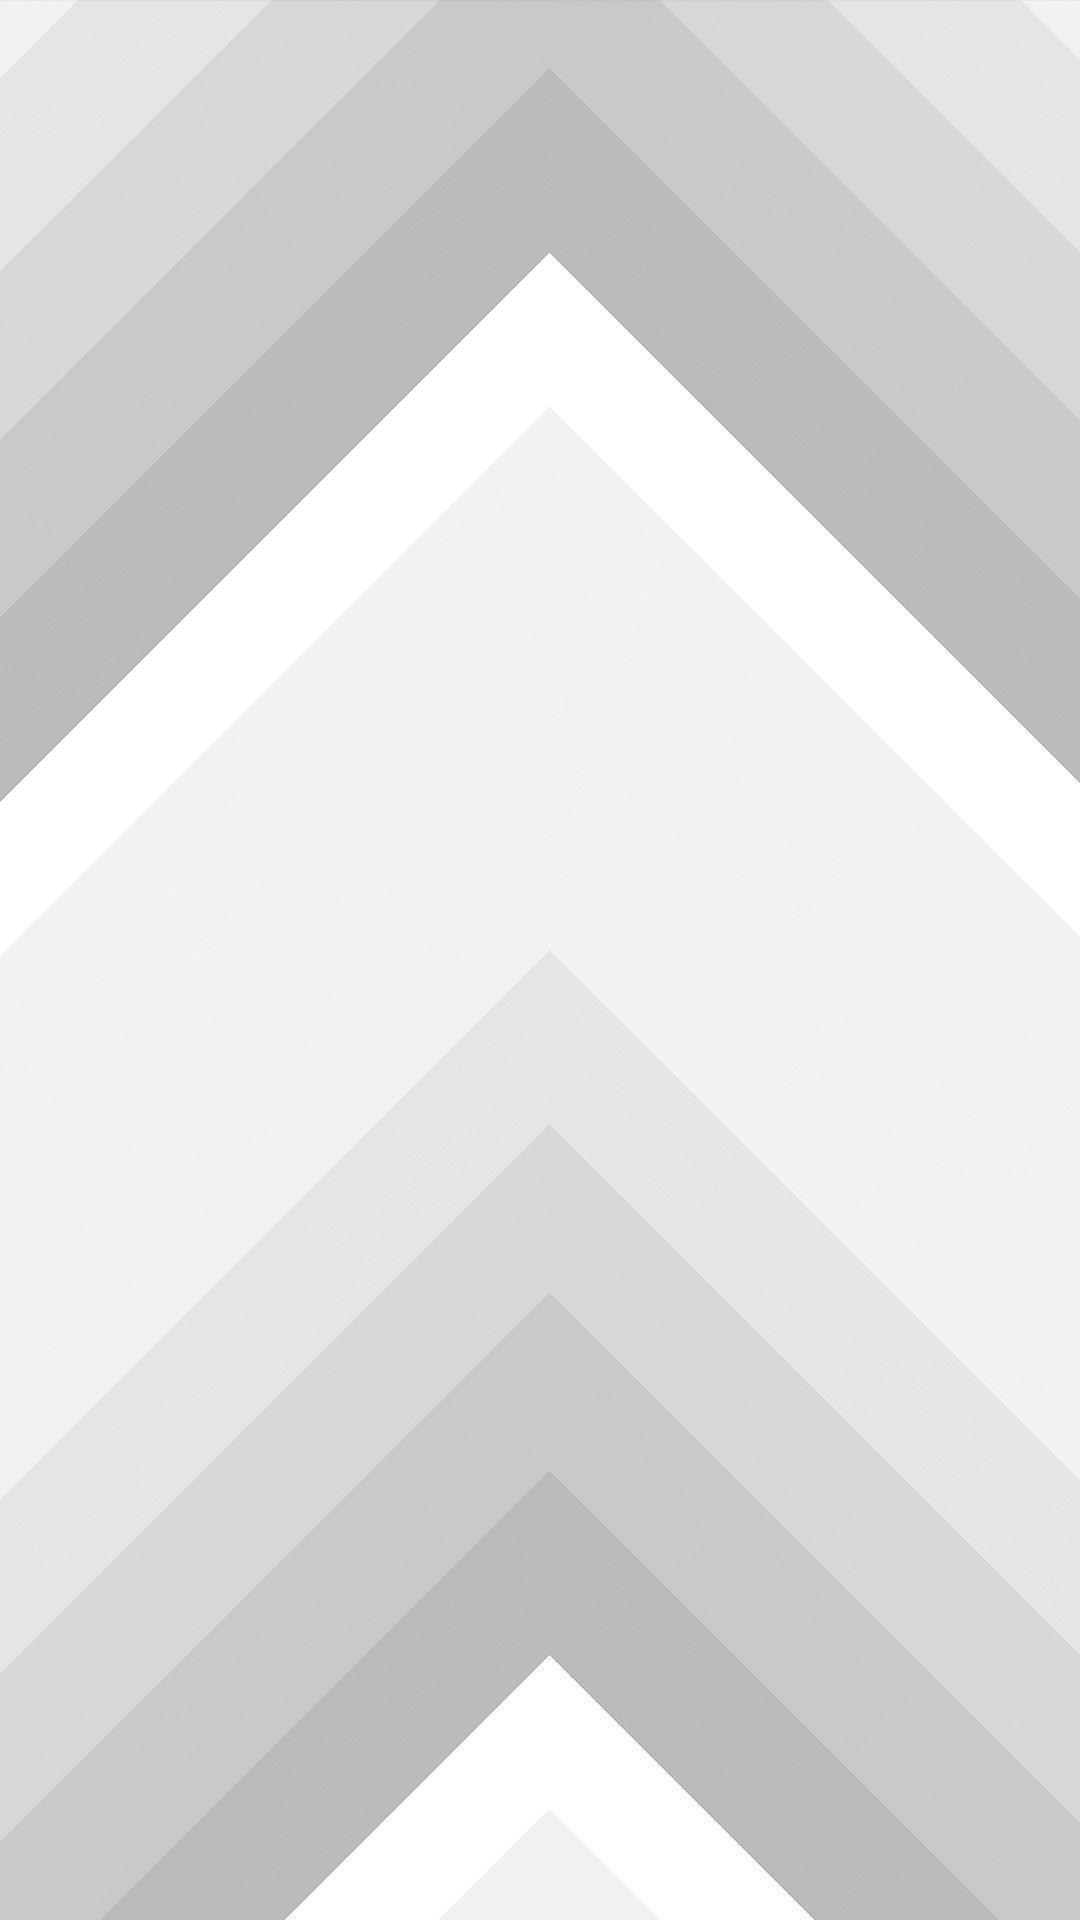 1080x1920 wallpaper with arrows Arrows - Best htc one wallpapers, free and easy to  download